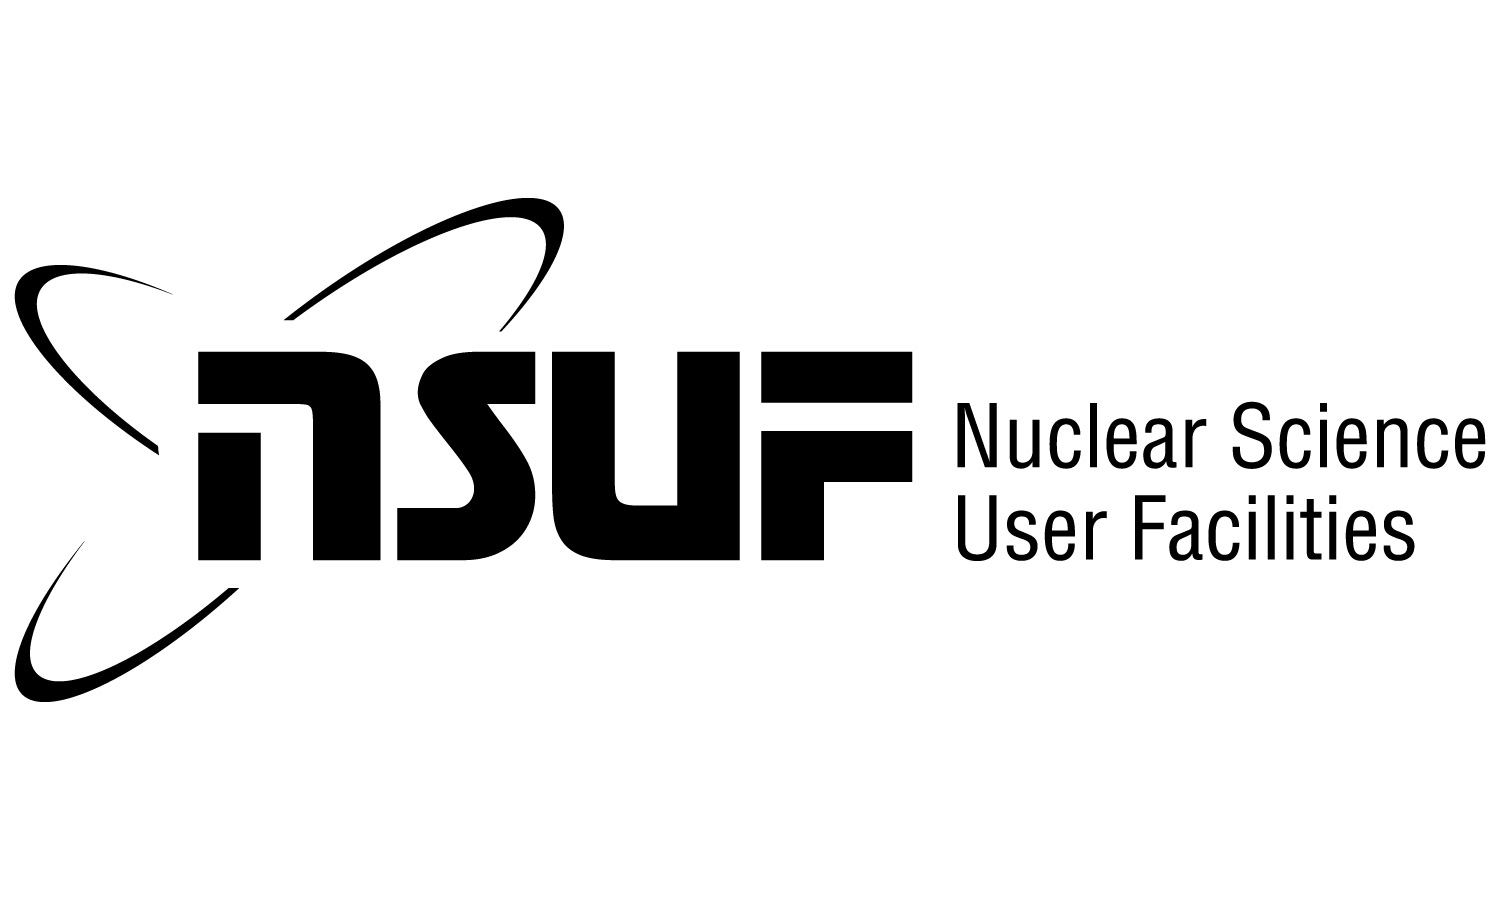 Nuclear Science User Facilities (NSUF)